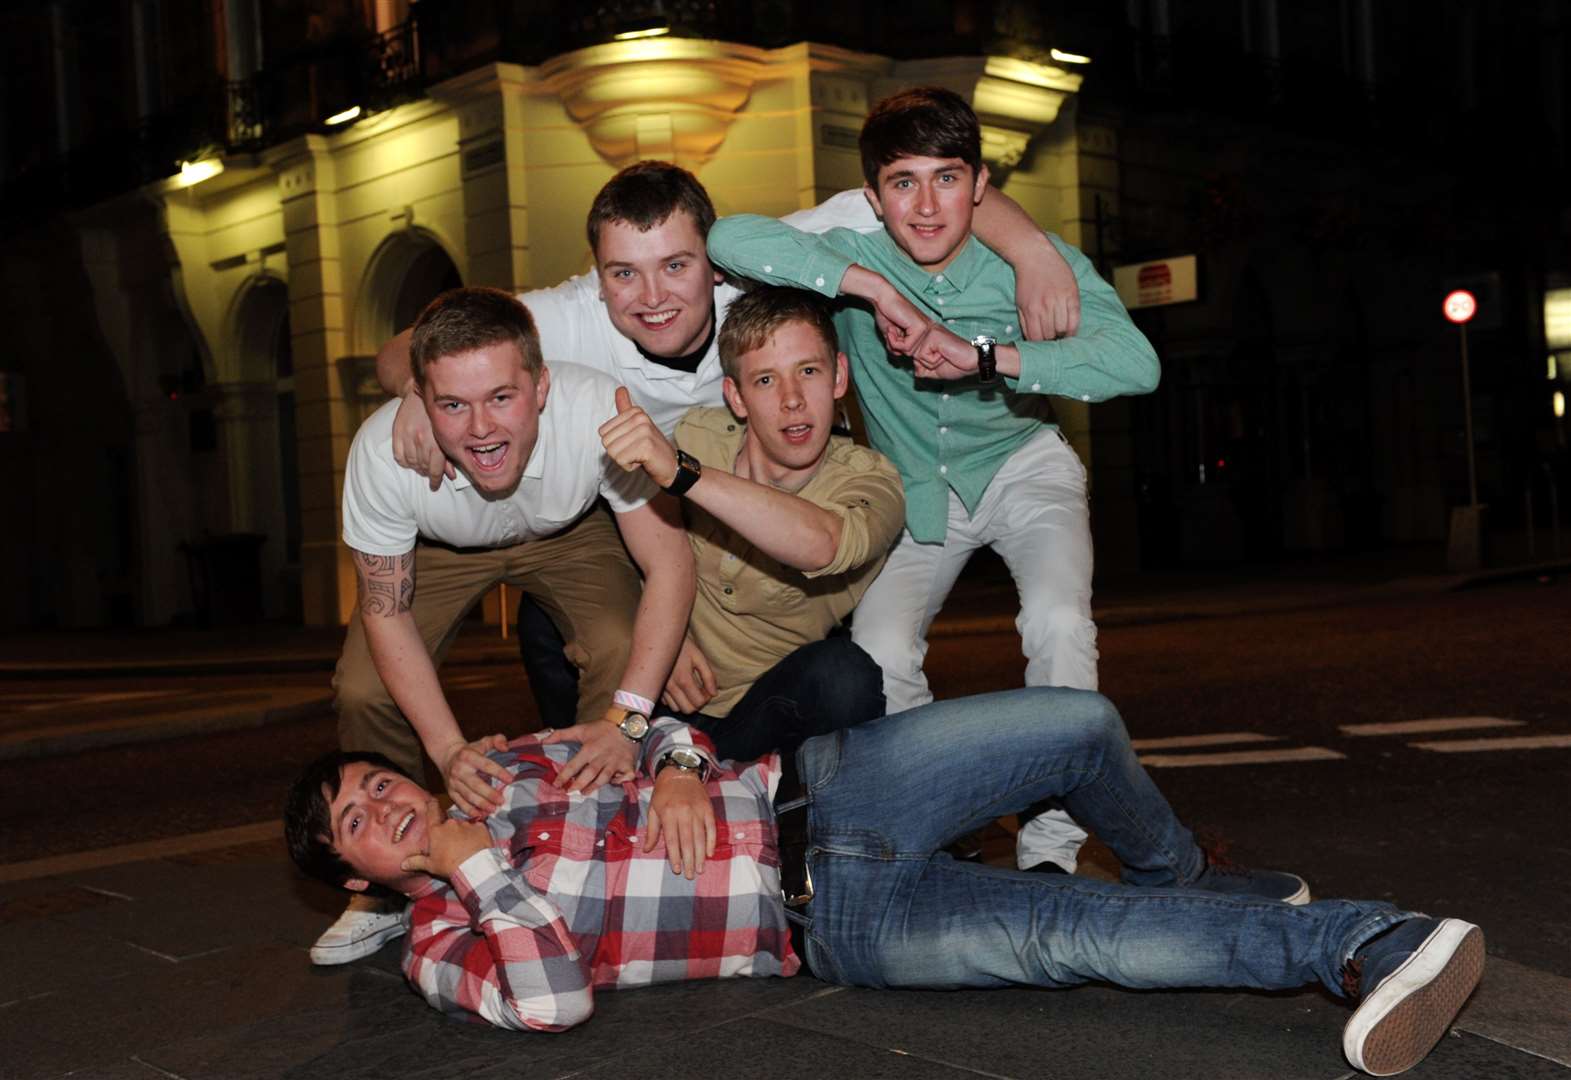 City Seen Sat 27th Aug 2011. Sean MacKenzie (second from left, back) starting off his stag night wtih some mates.